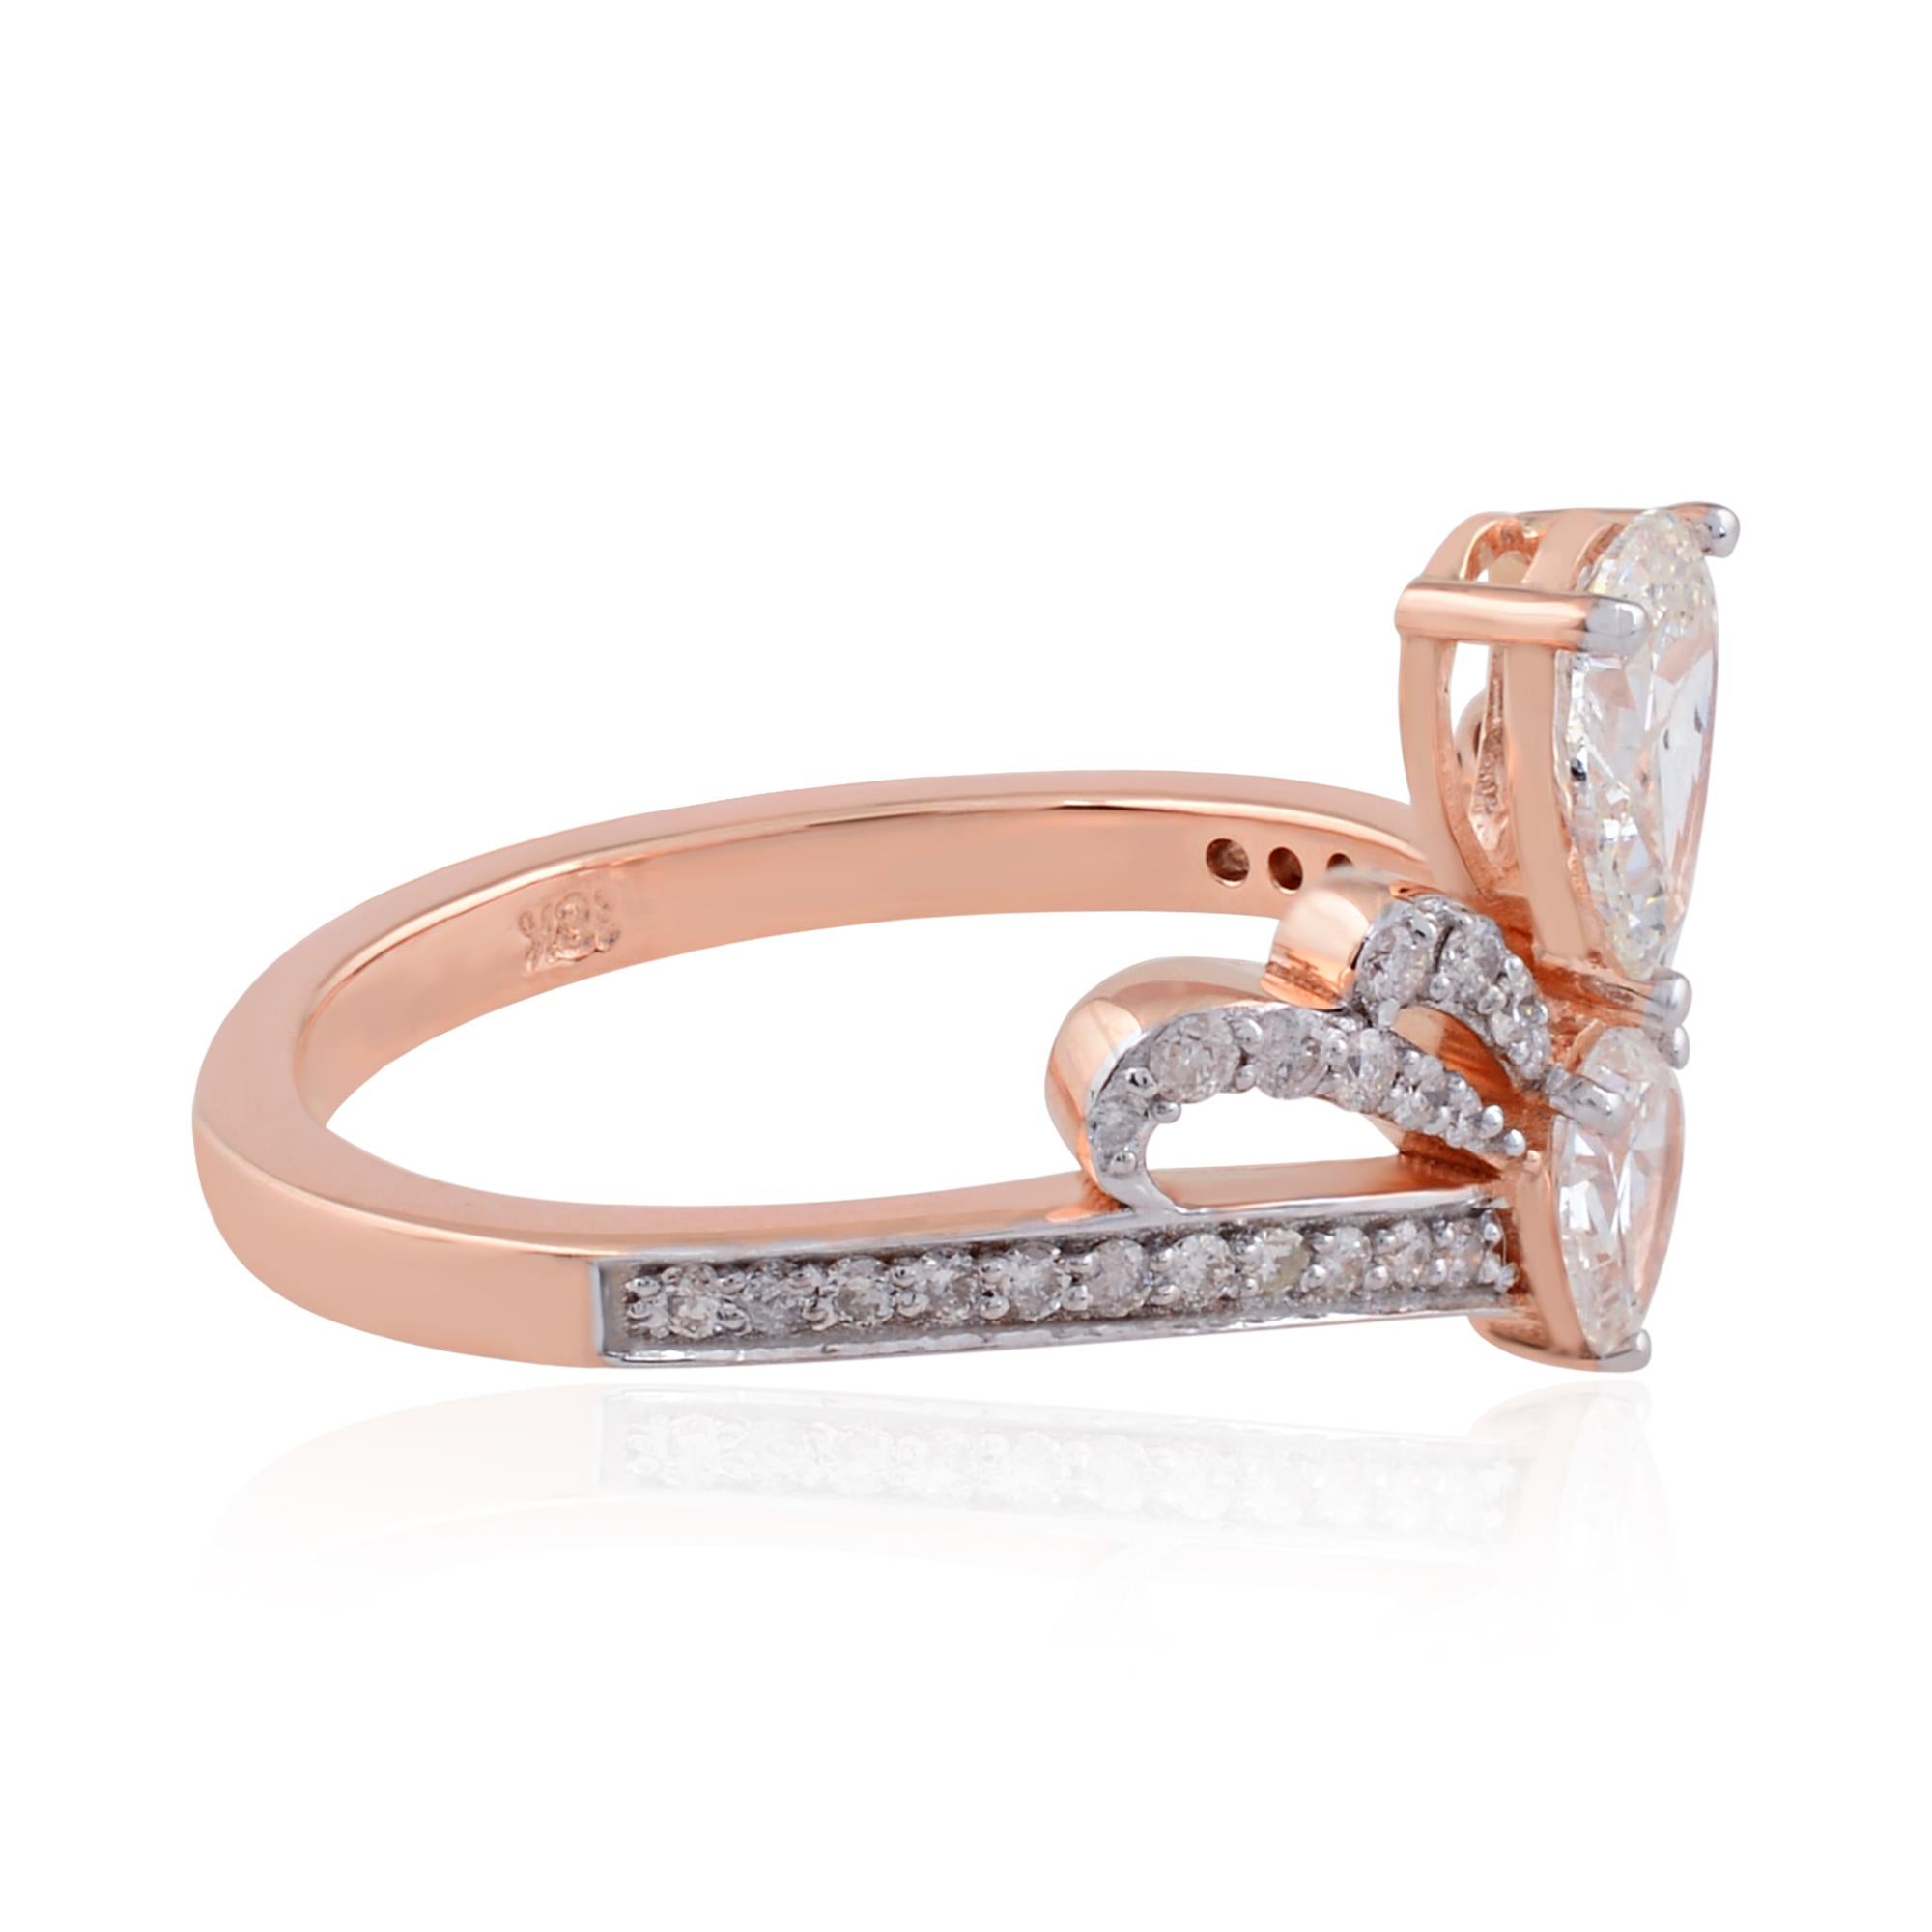 For Sale:  0.9 Carat SI Clarity HI Color Pear Diamond Crown Ring 18 Karat Rose Gold Jewelry 4